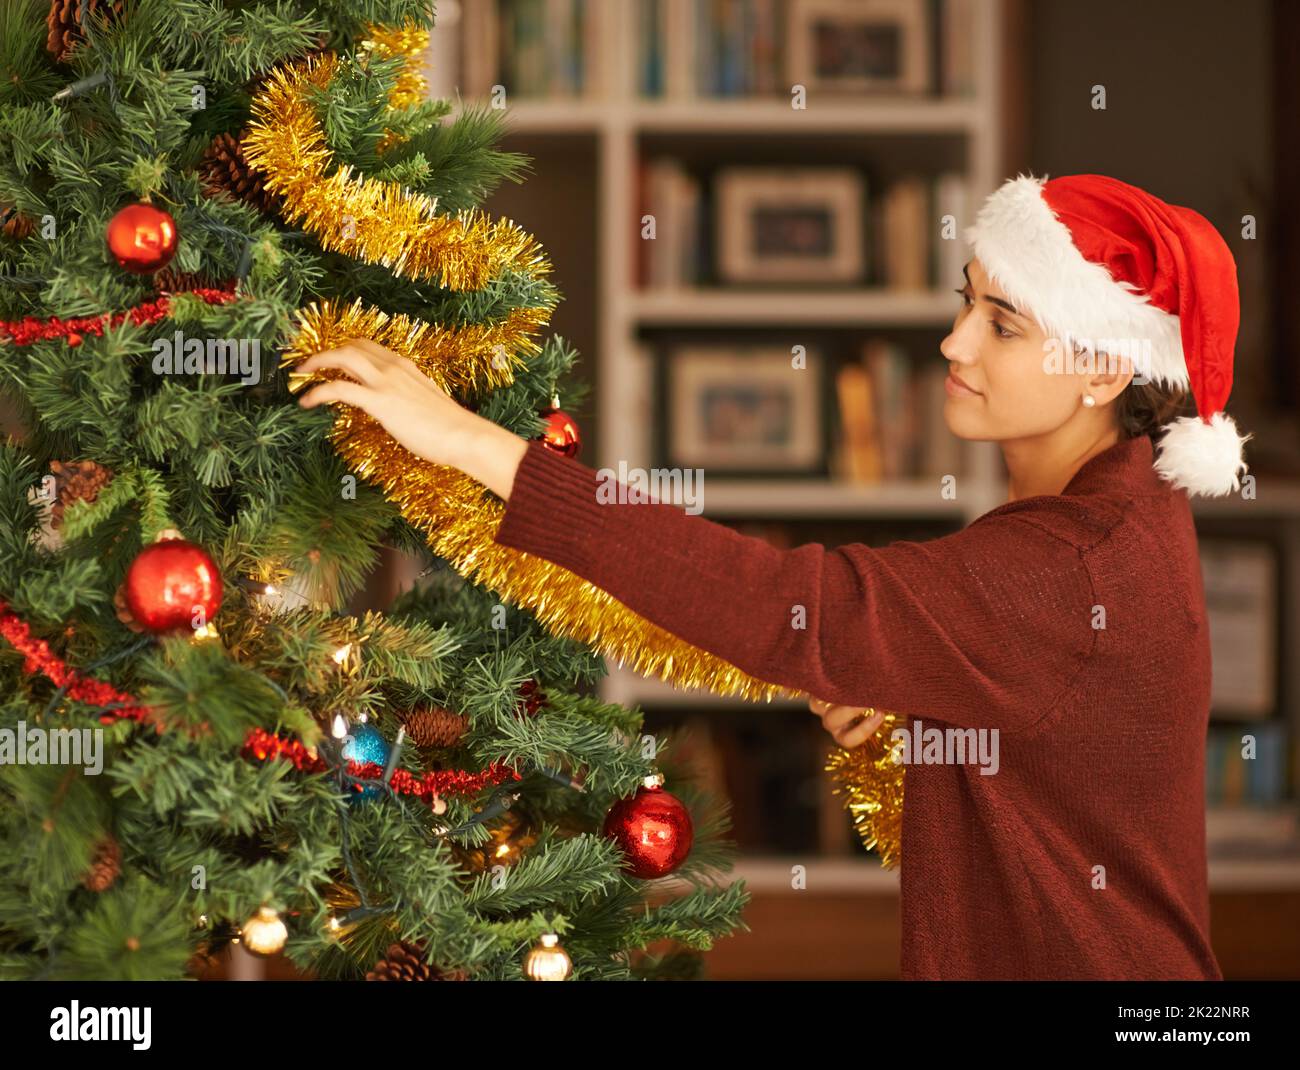 Christmas tree made of drinking straws on green background with tinsel  Stock Photo - Alamy